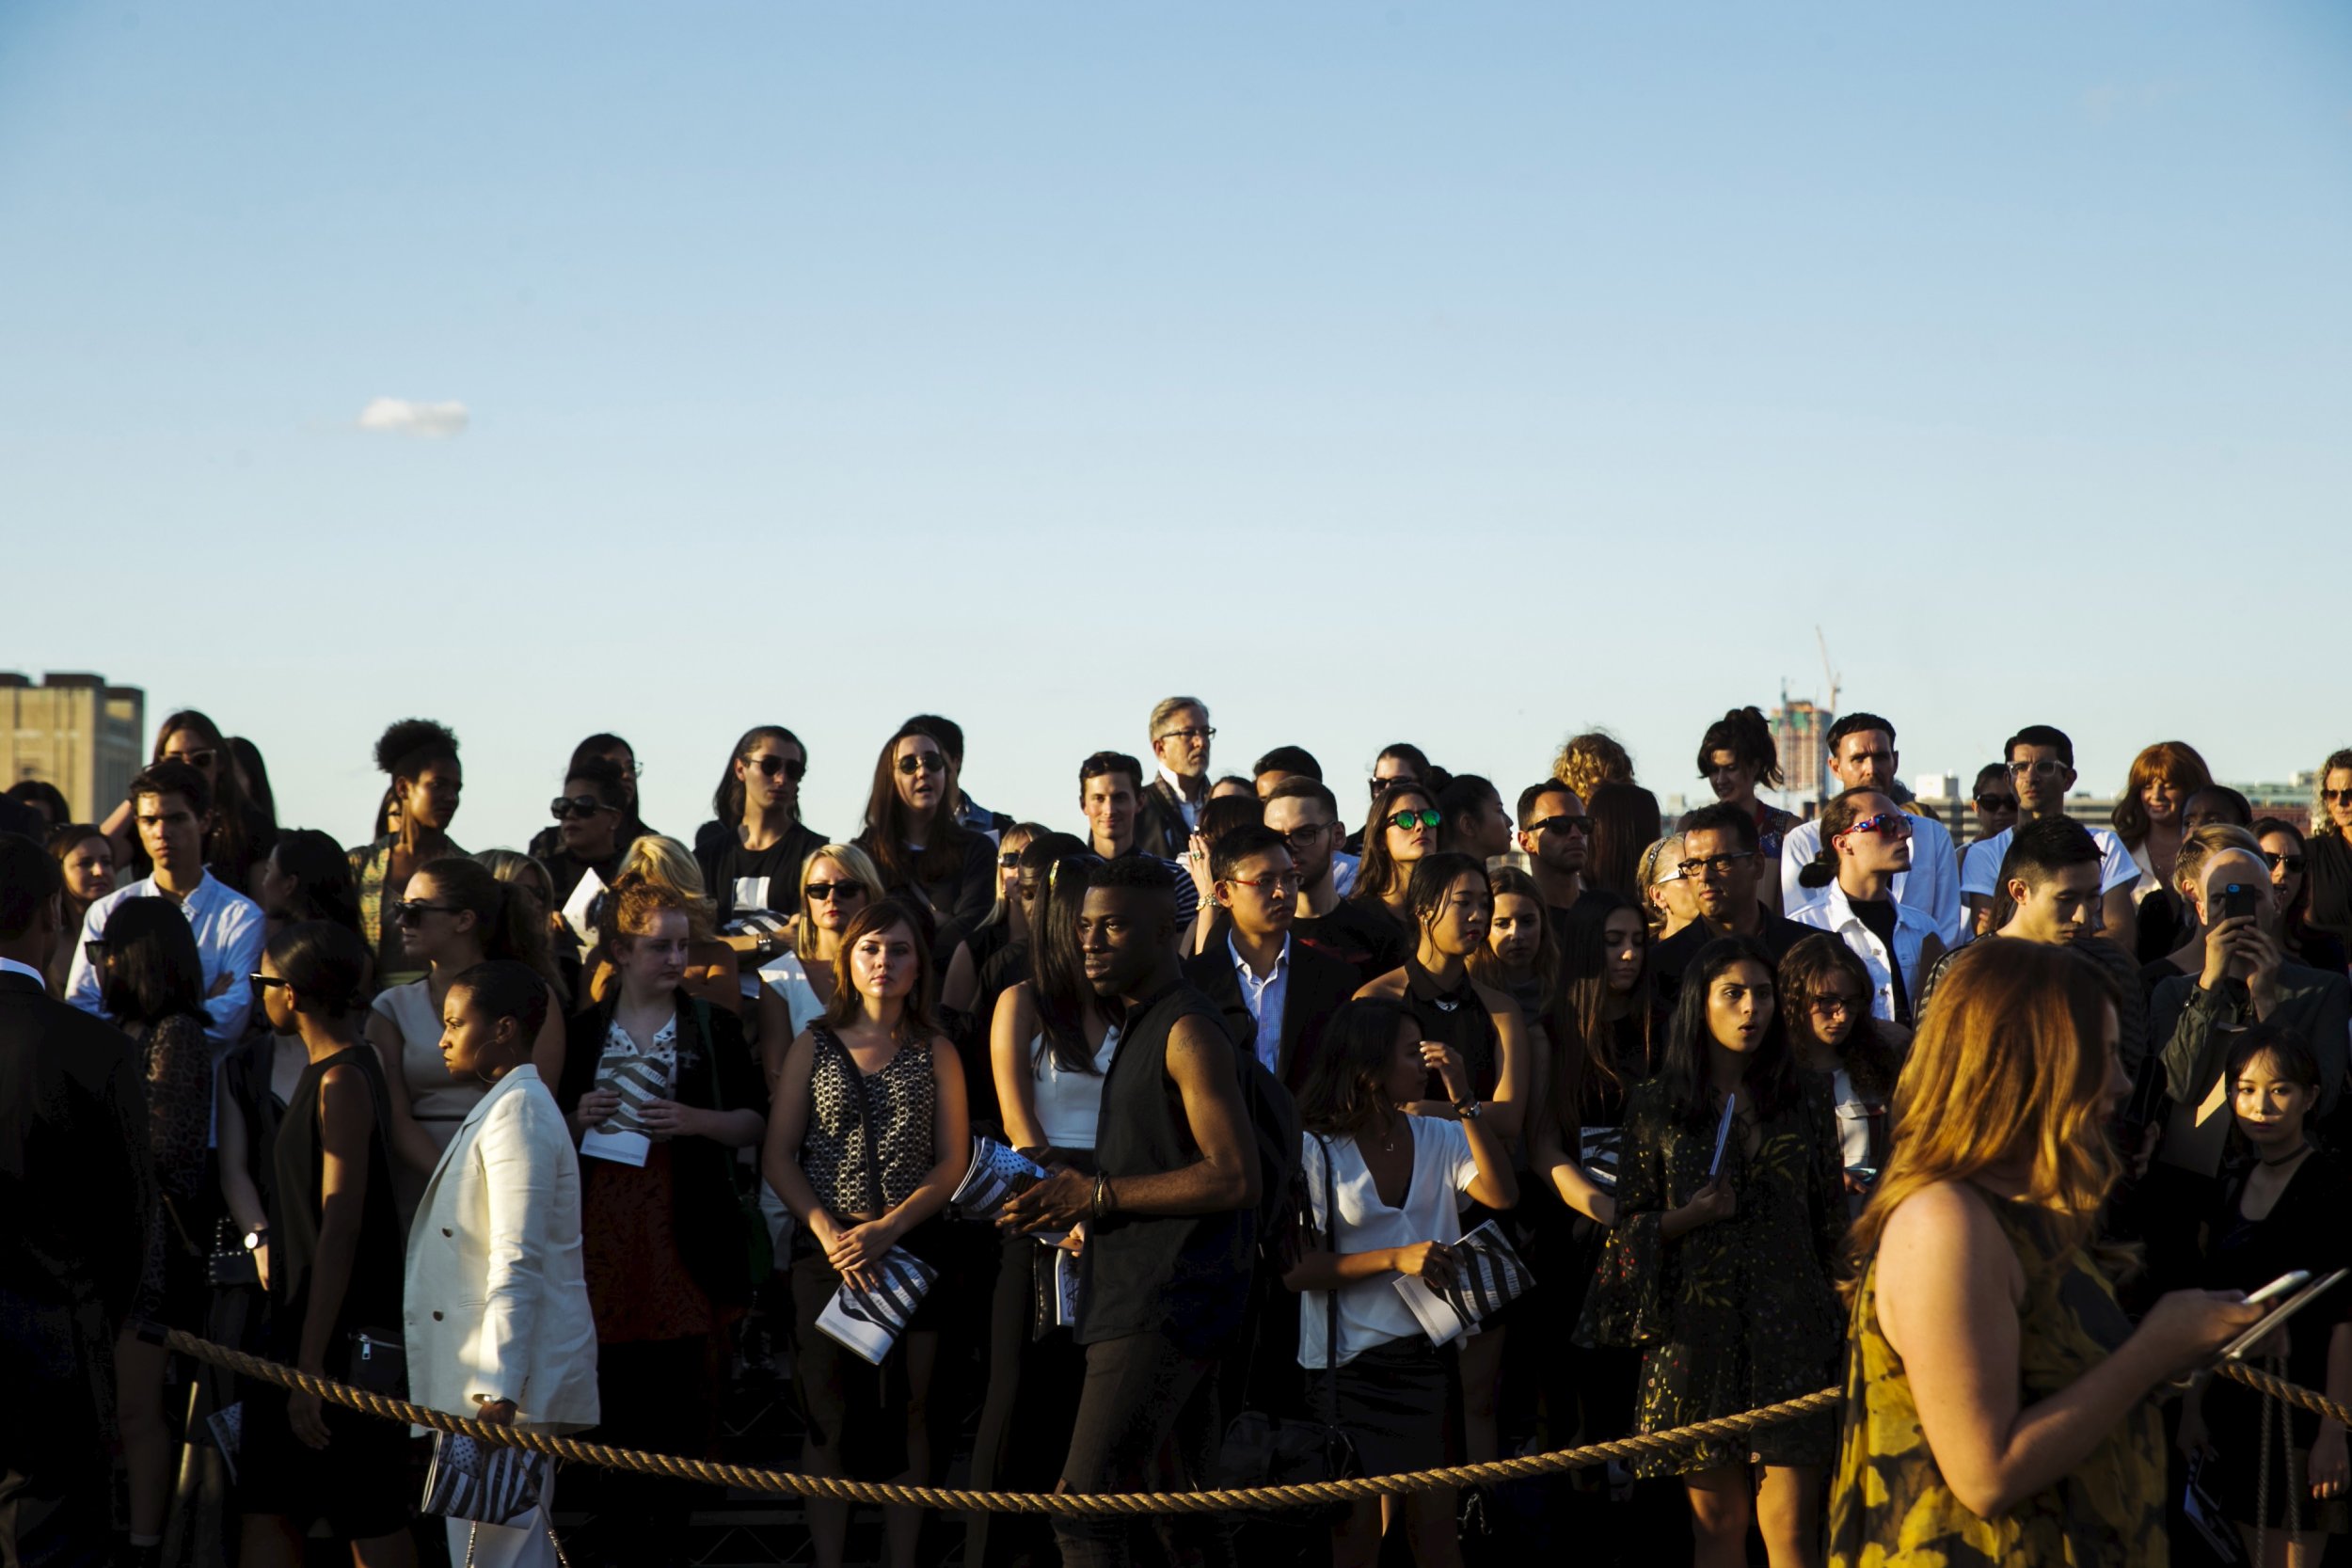 1523 Members of the audience wait to see a presentation of the Givenchy SpringSummer 2016 collection